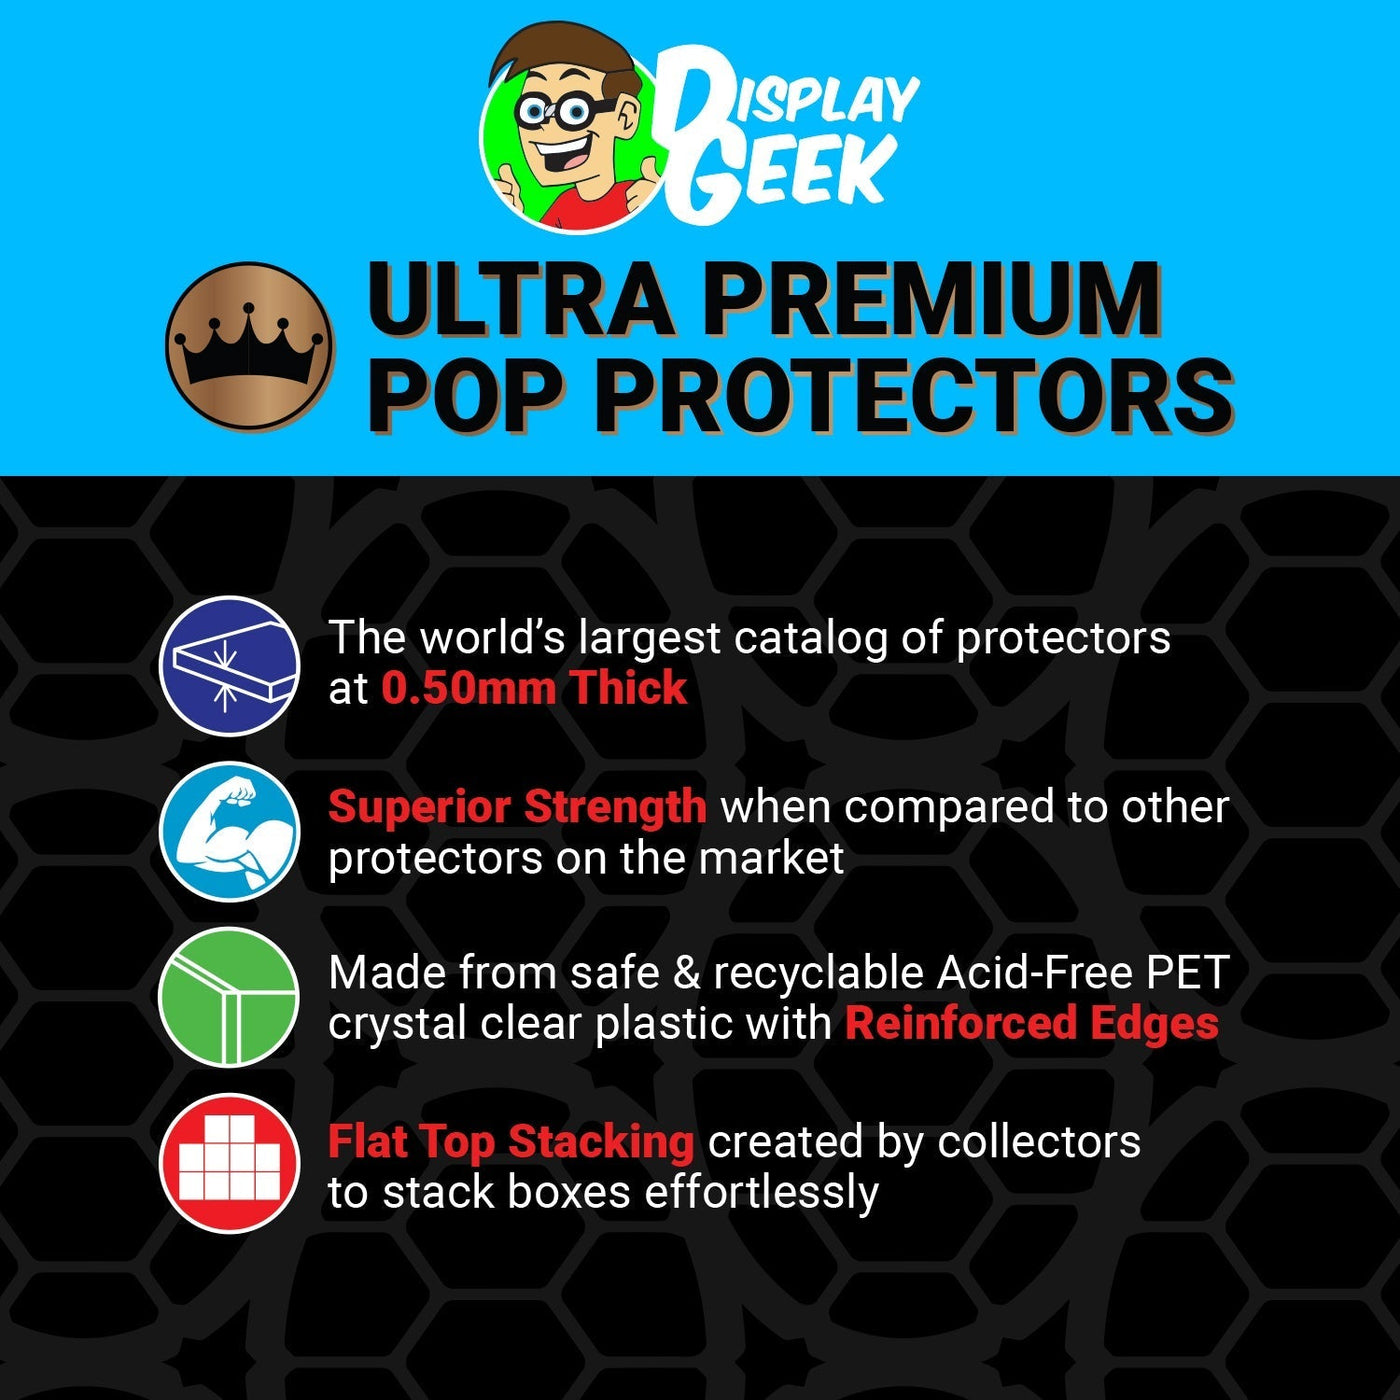 Pop Protector for 5 Pack Guardians of the Galaxy Star-Lord, Groot, Drax, Mantis & Rocket Holiday Funko Pop on The Protector Guide App by Display Geek